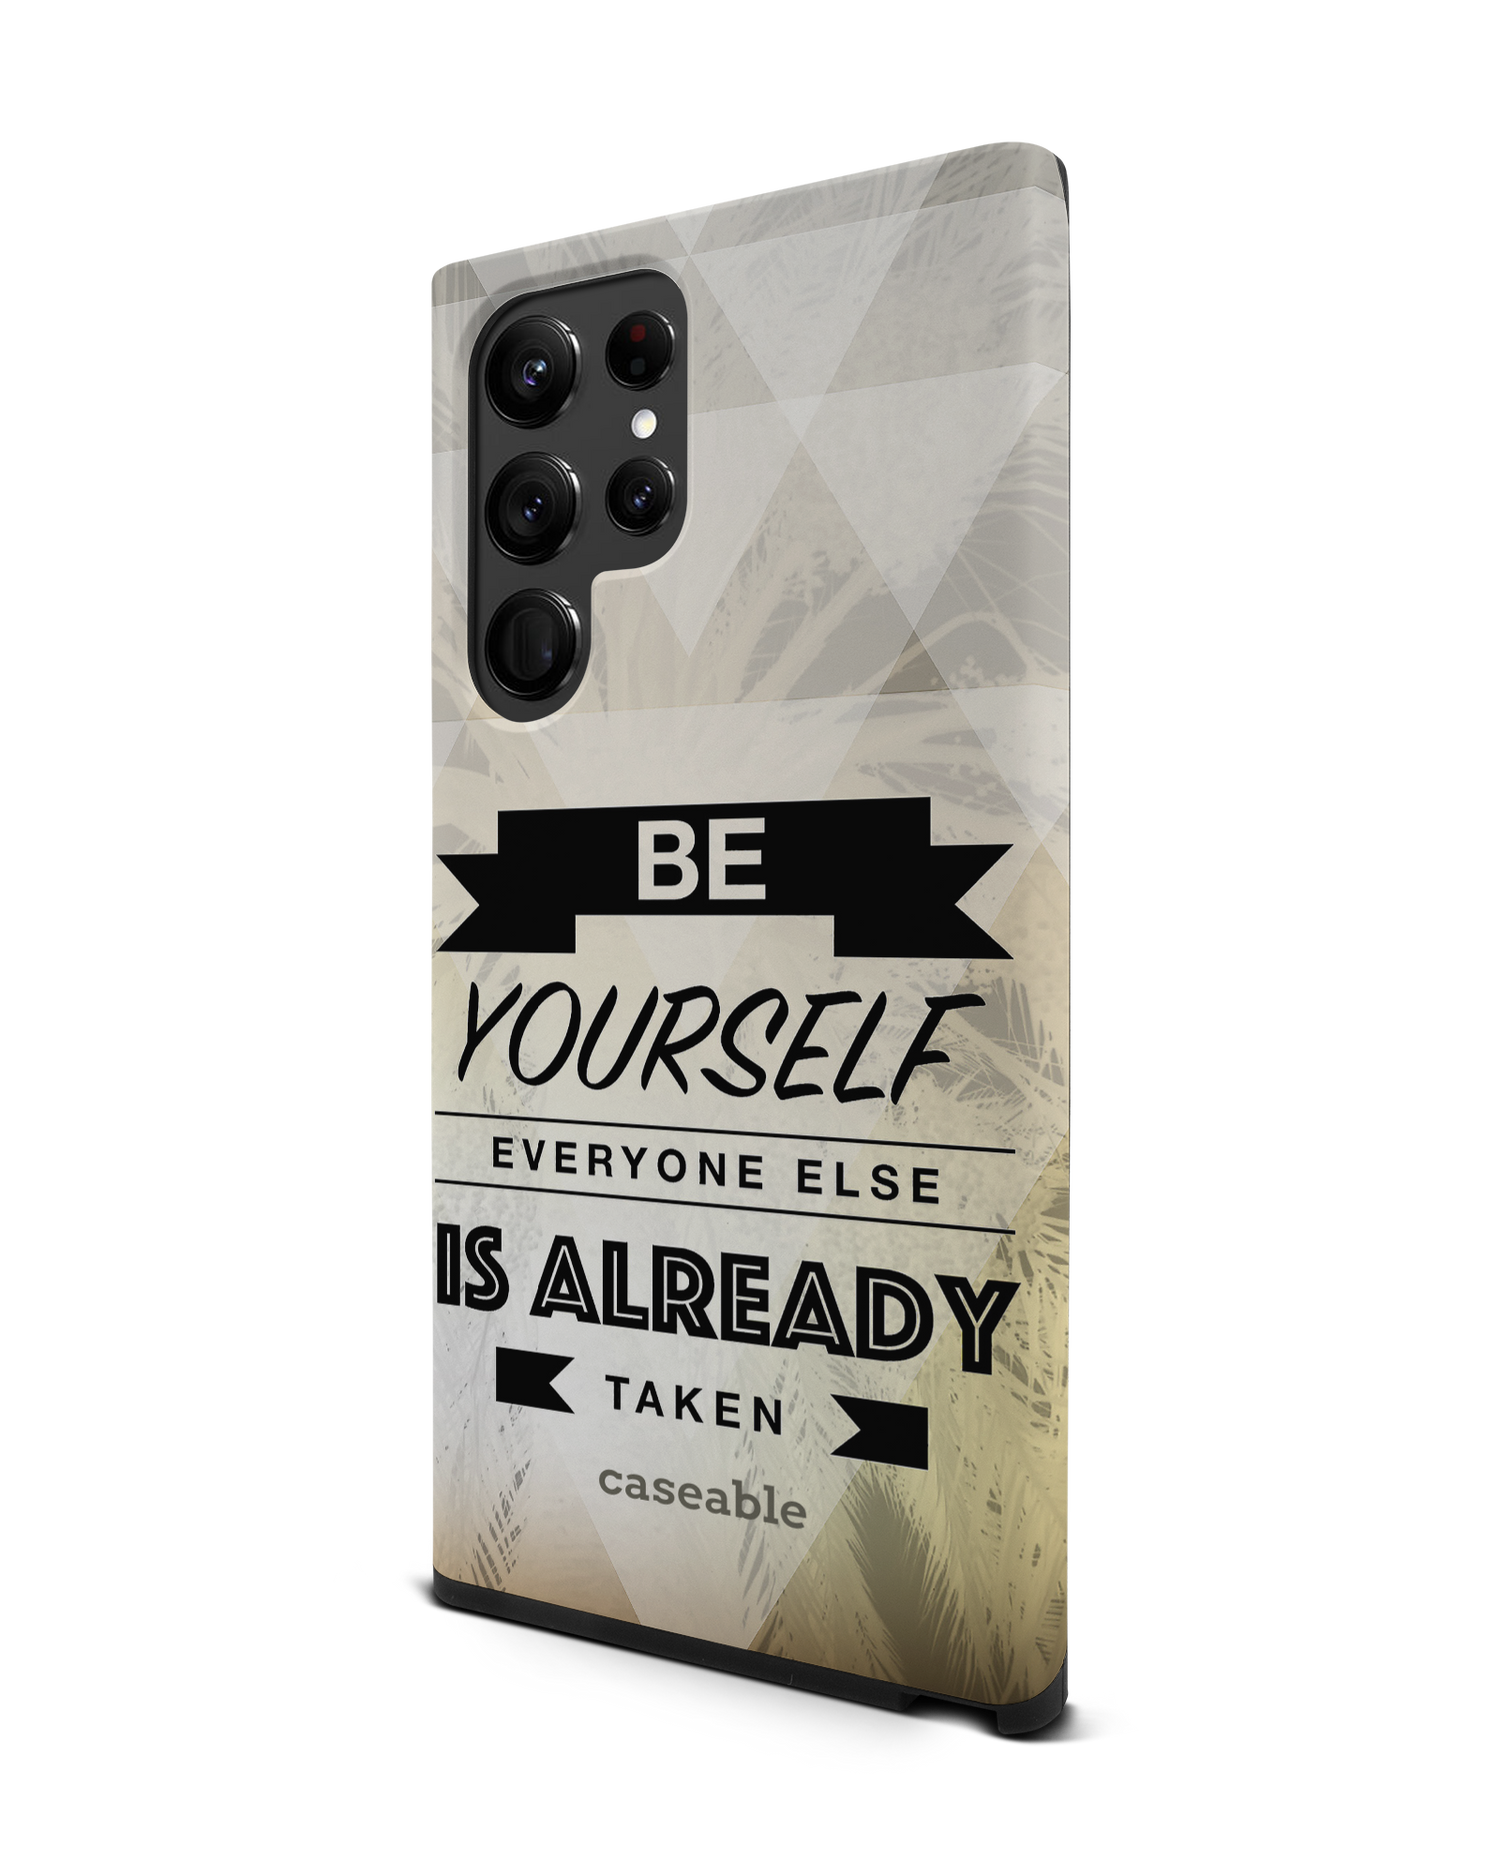 Be Yourself Premium Phone Case Samsung Galaxy S22 Ultra 5G: View from the right side